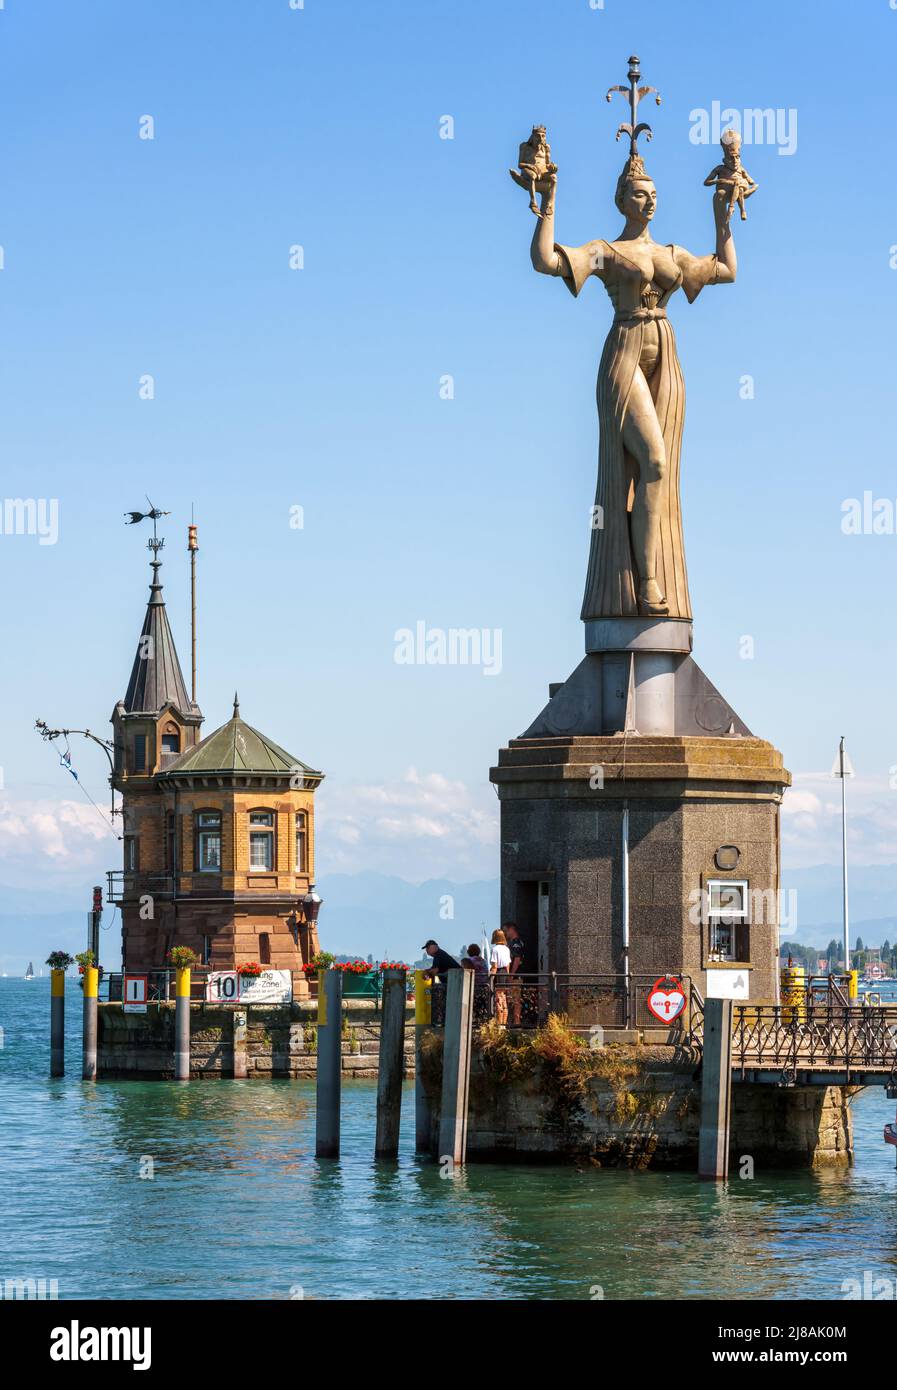 Constance, Germany - July 30, 2019: Old lighthouse and statue of Imperia in harbor of Konstanz. Sculpture is tourist attraction of city. Scenery of Co Stock Photo